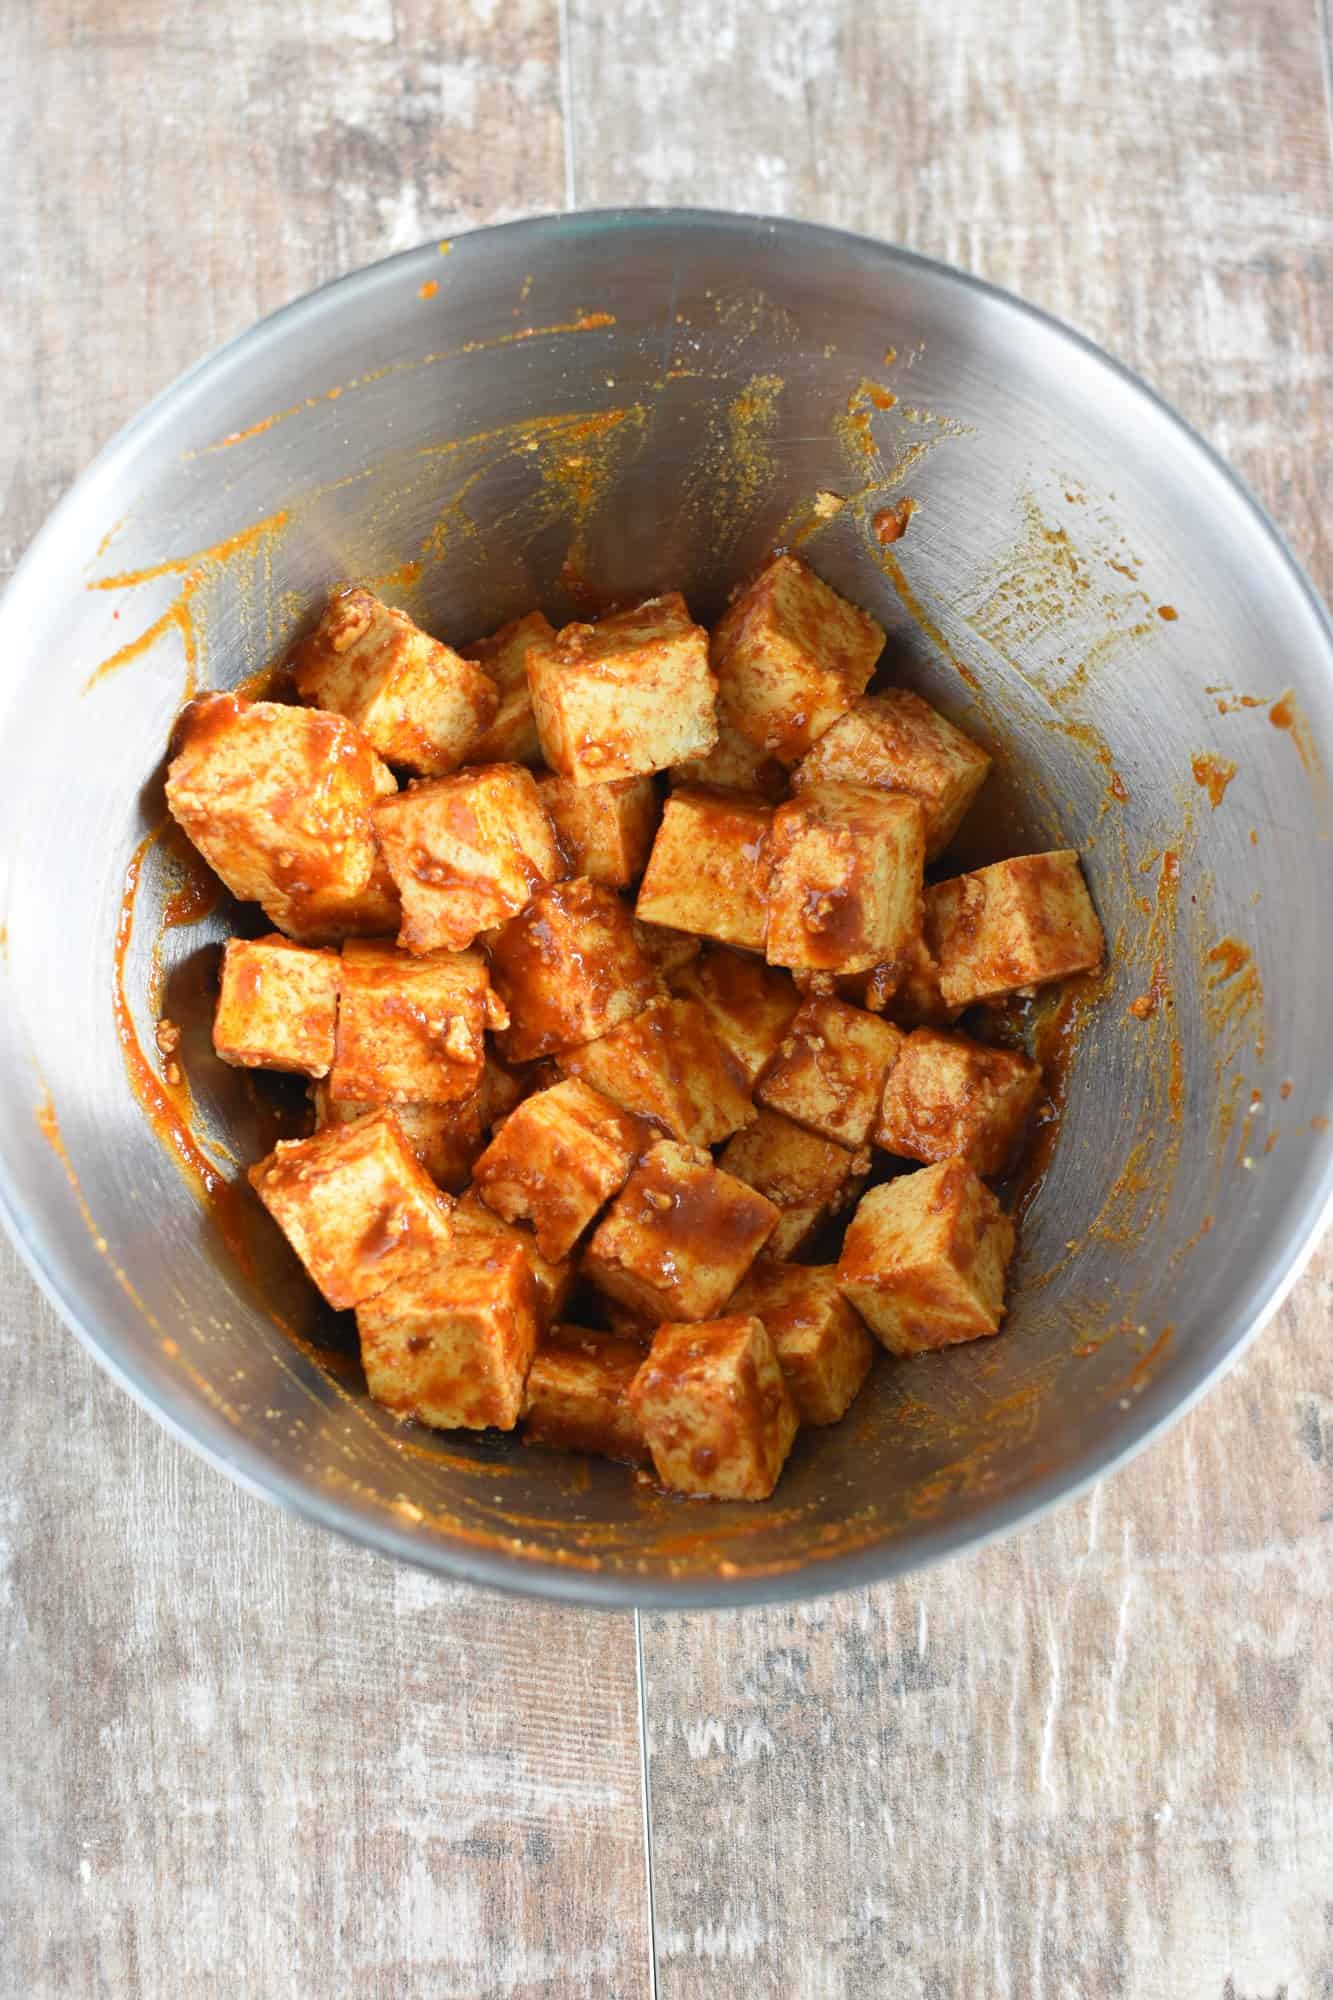 Tofu pieces coated with marinade in the mixing bowl